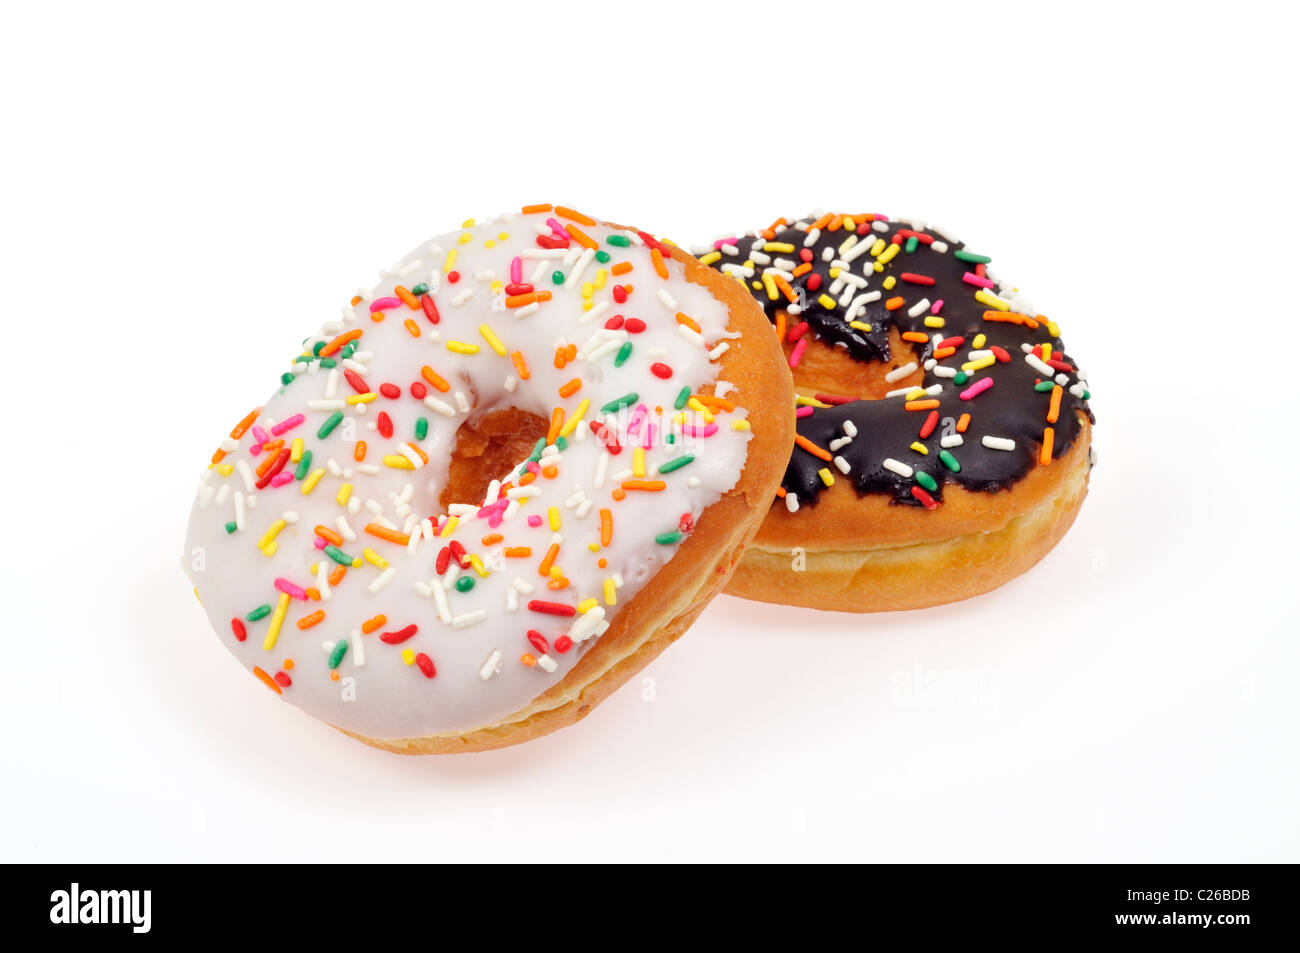 Vanilla frosted donut and chocolate frosted doughnut with colorful sprinkles on white background, cut out. Stock Photo